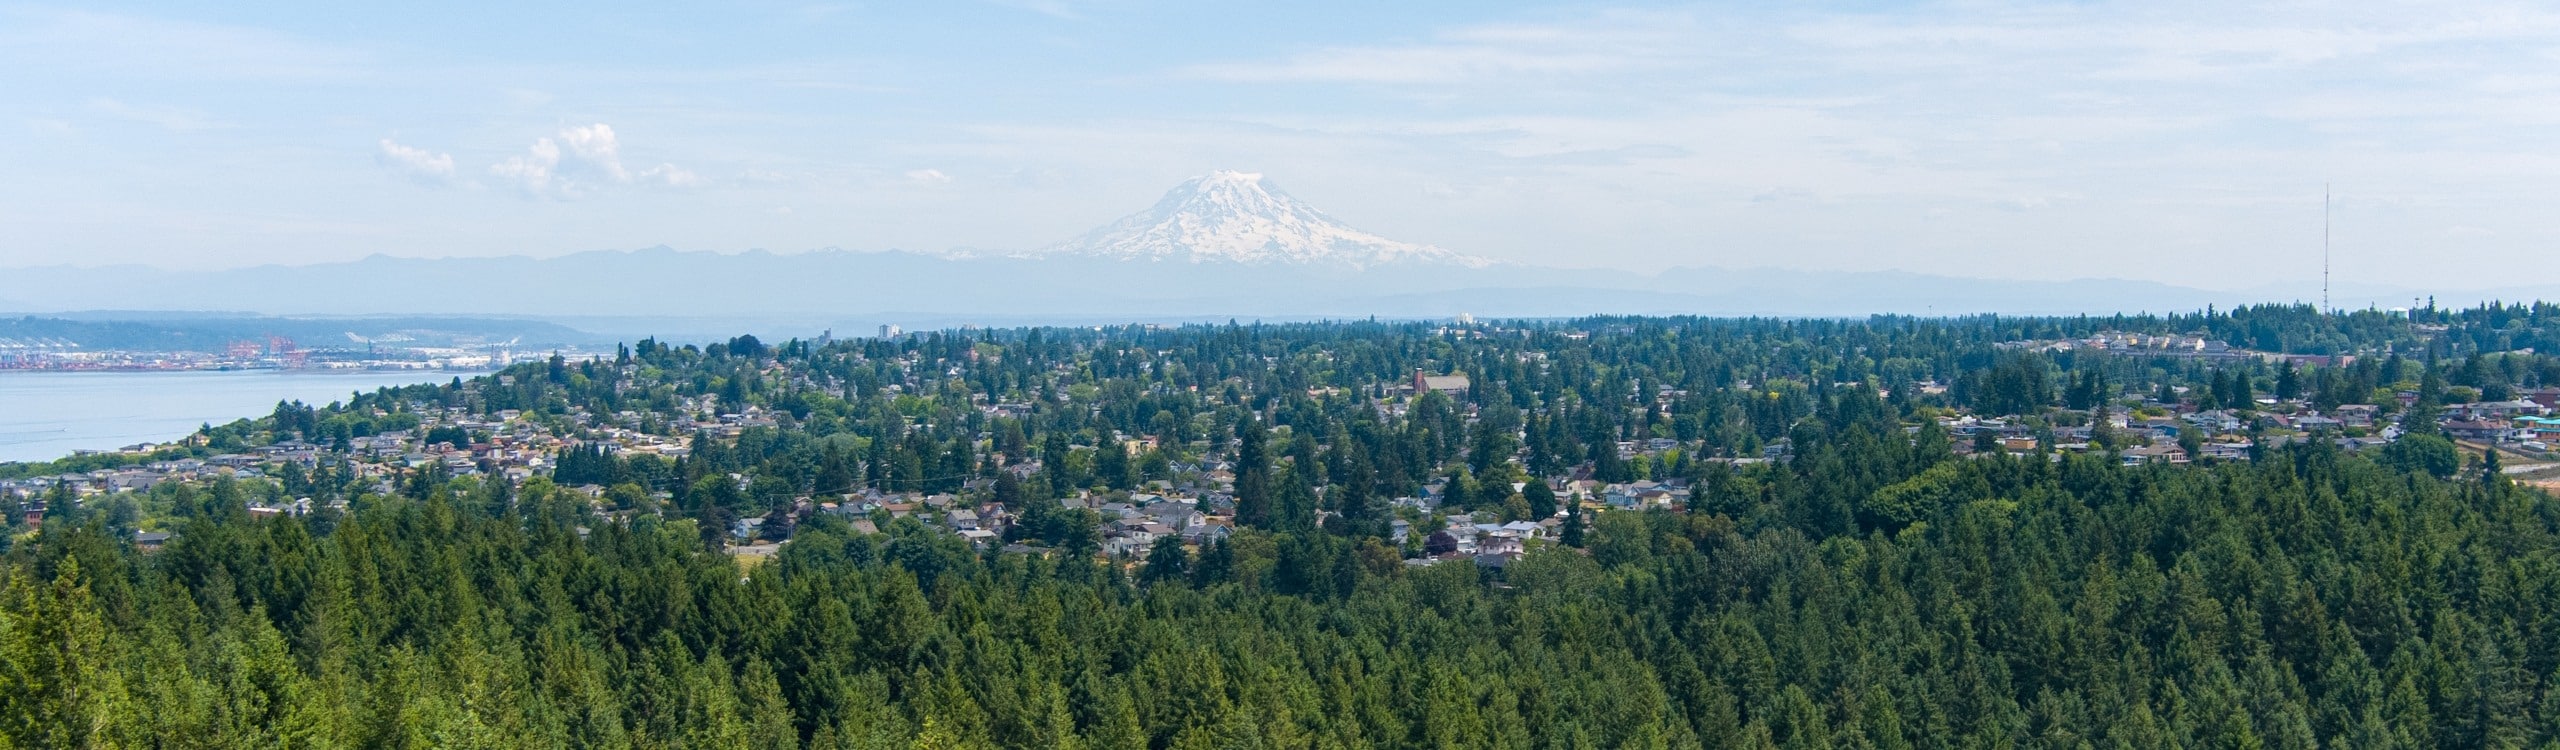 Aerial view of Mount Rainier and Tacoma in Washington State